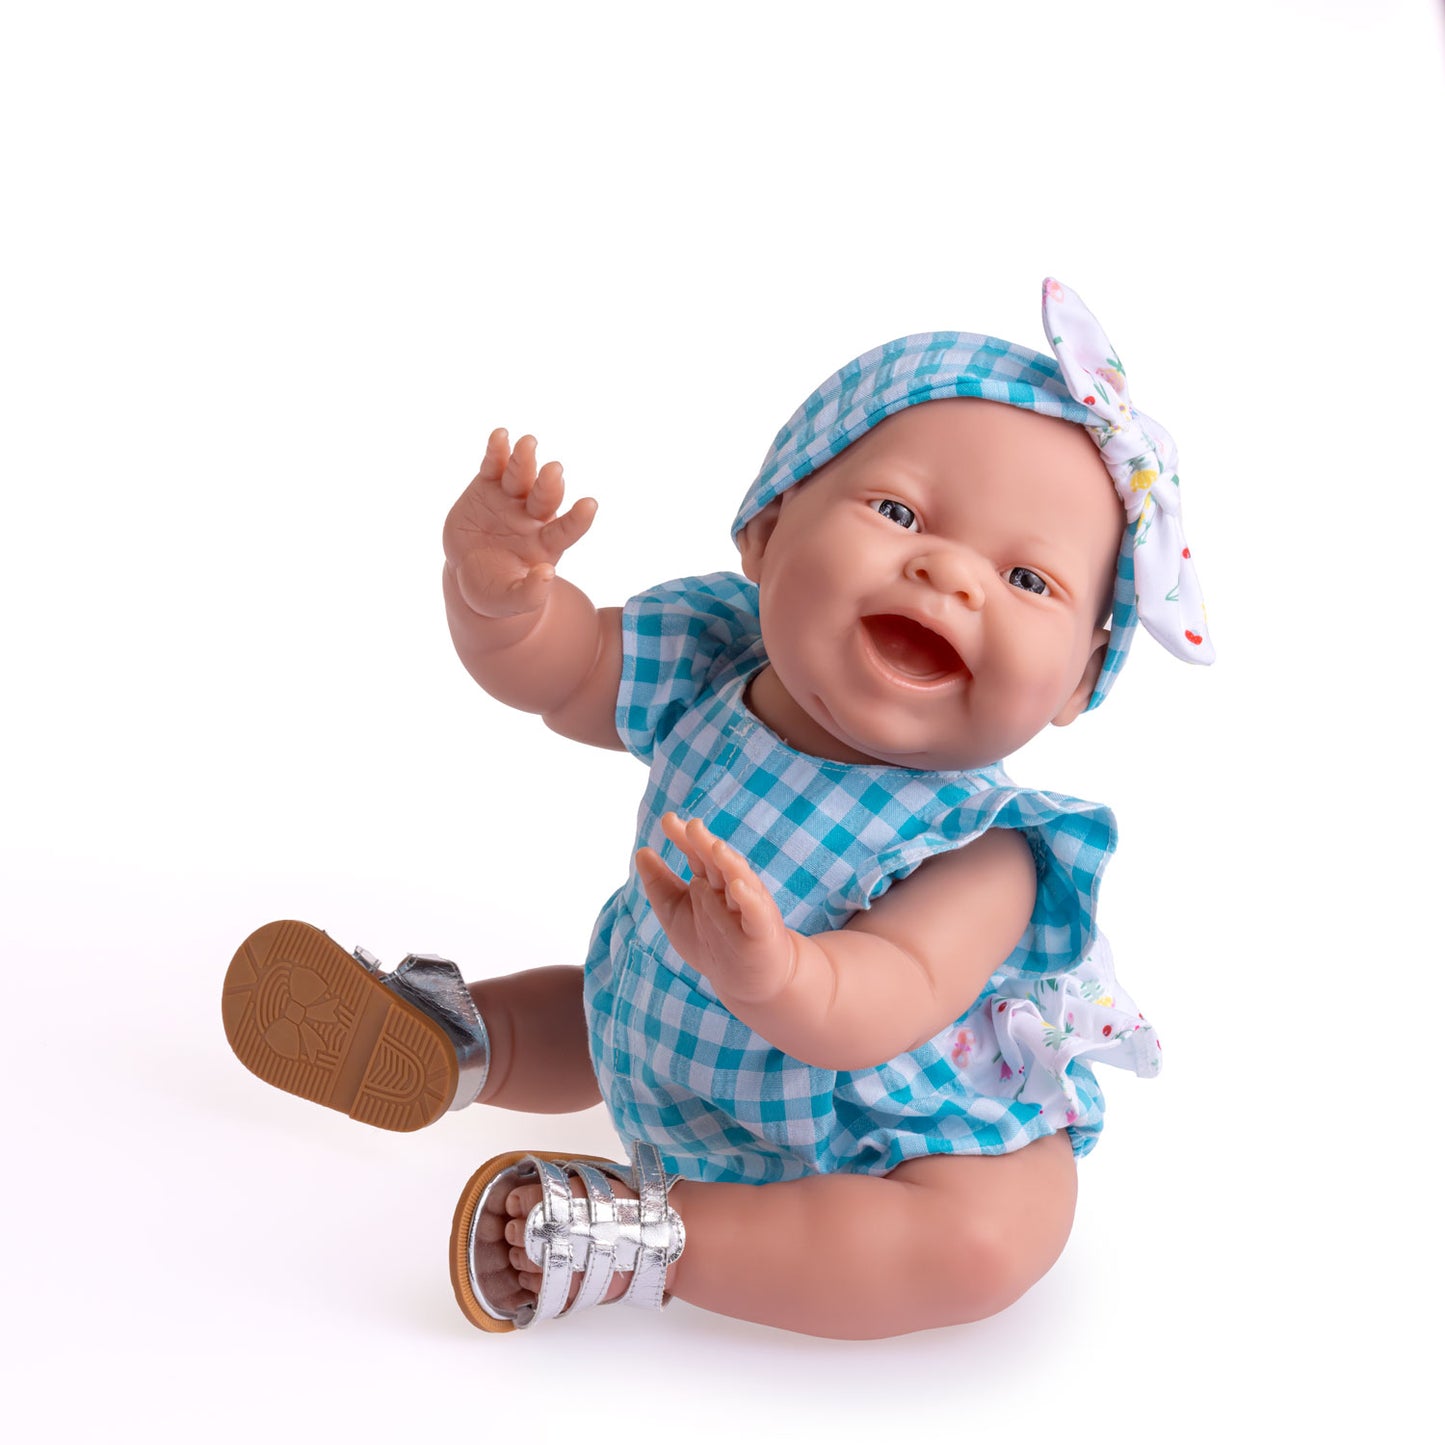 Lola on the go - 14” Realistic All Vinyl Posable Play Doll "REAL GIRL" – Happy Face- Dressed in 2 Piece Fun Collection Outfit with Shoes -By Berenguer Boutique